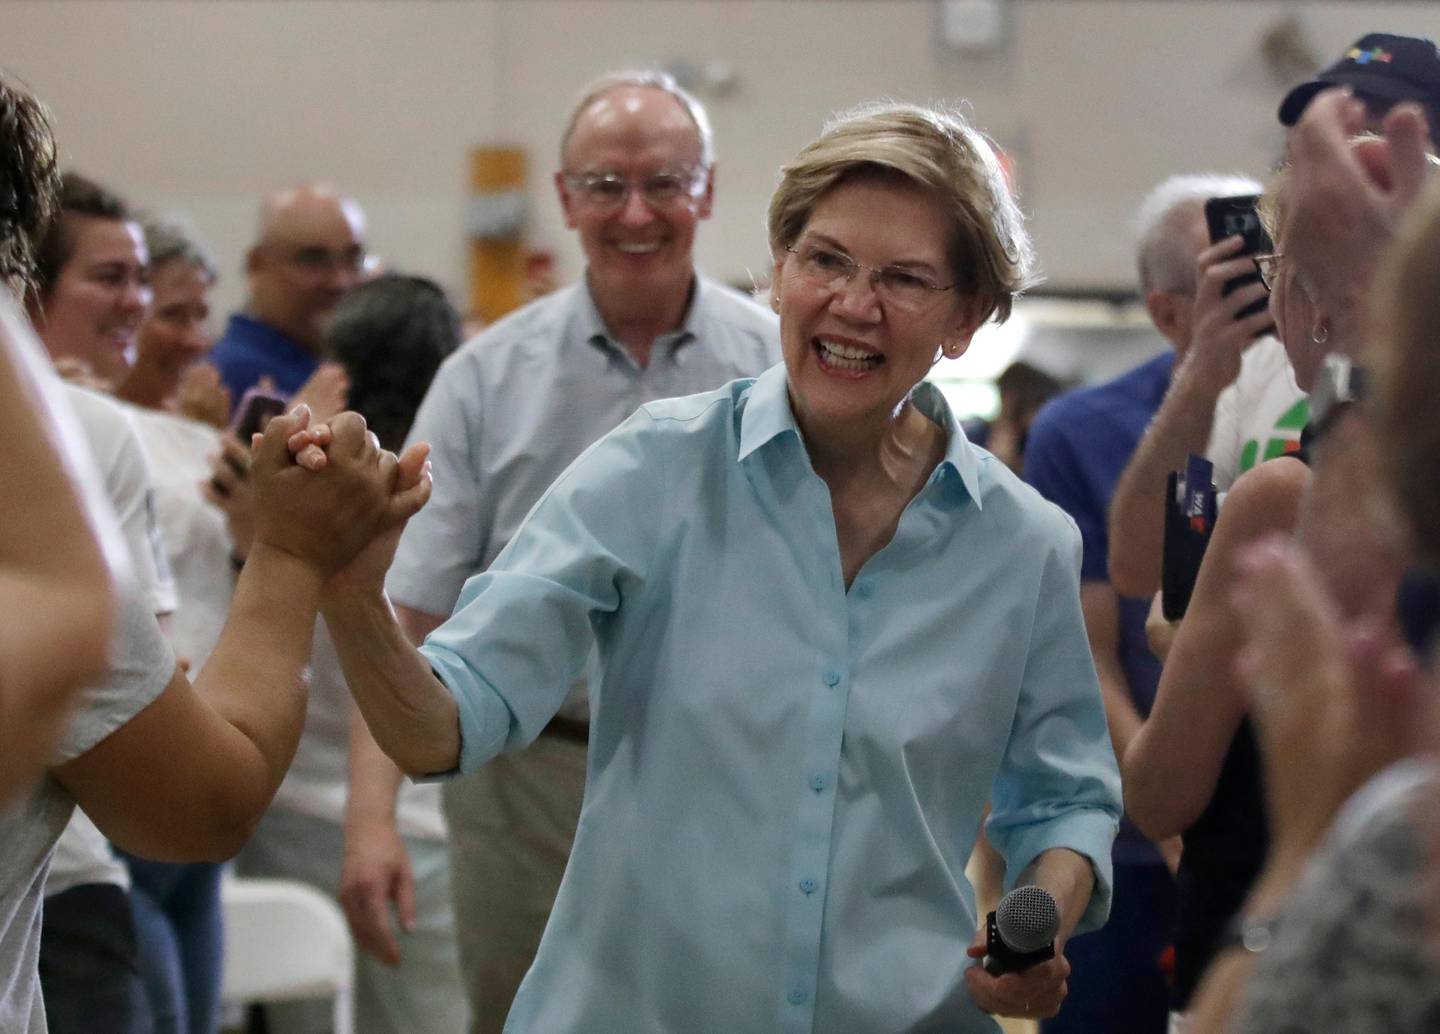 Democratic presidential candidate Sen. Elizabeth Warren, D-Mass., greets people as she arrives at a campaign event, Saturday, July 27, 2019, in Derry, N.H. (AP Photo/Elise Amendola)